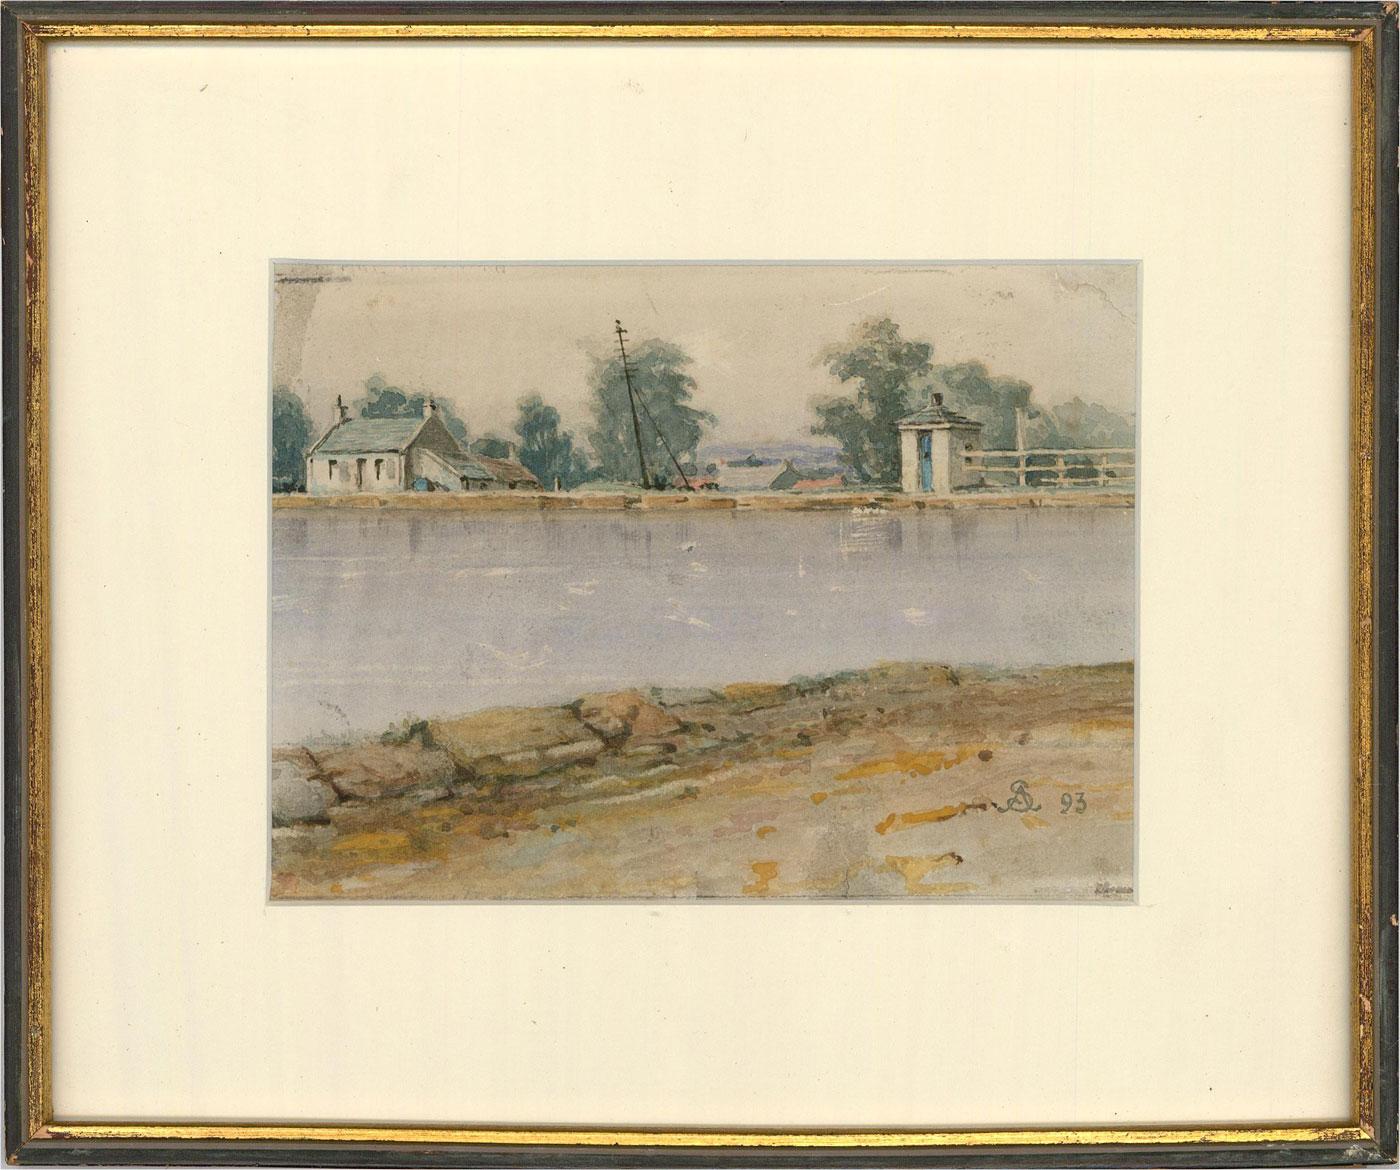 A delightful watercolour study of the view across a river bank towards a cottage. Well presented in a mount and black frame with gilt trim. Monogrammed and dated to the lower right. On wove.